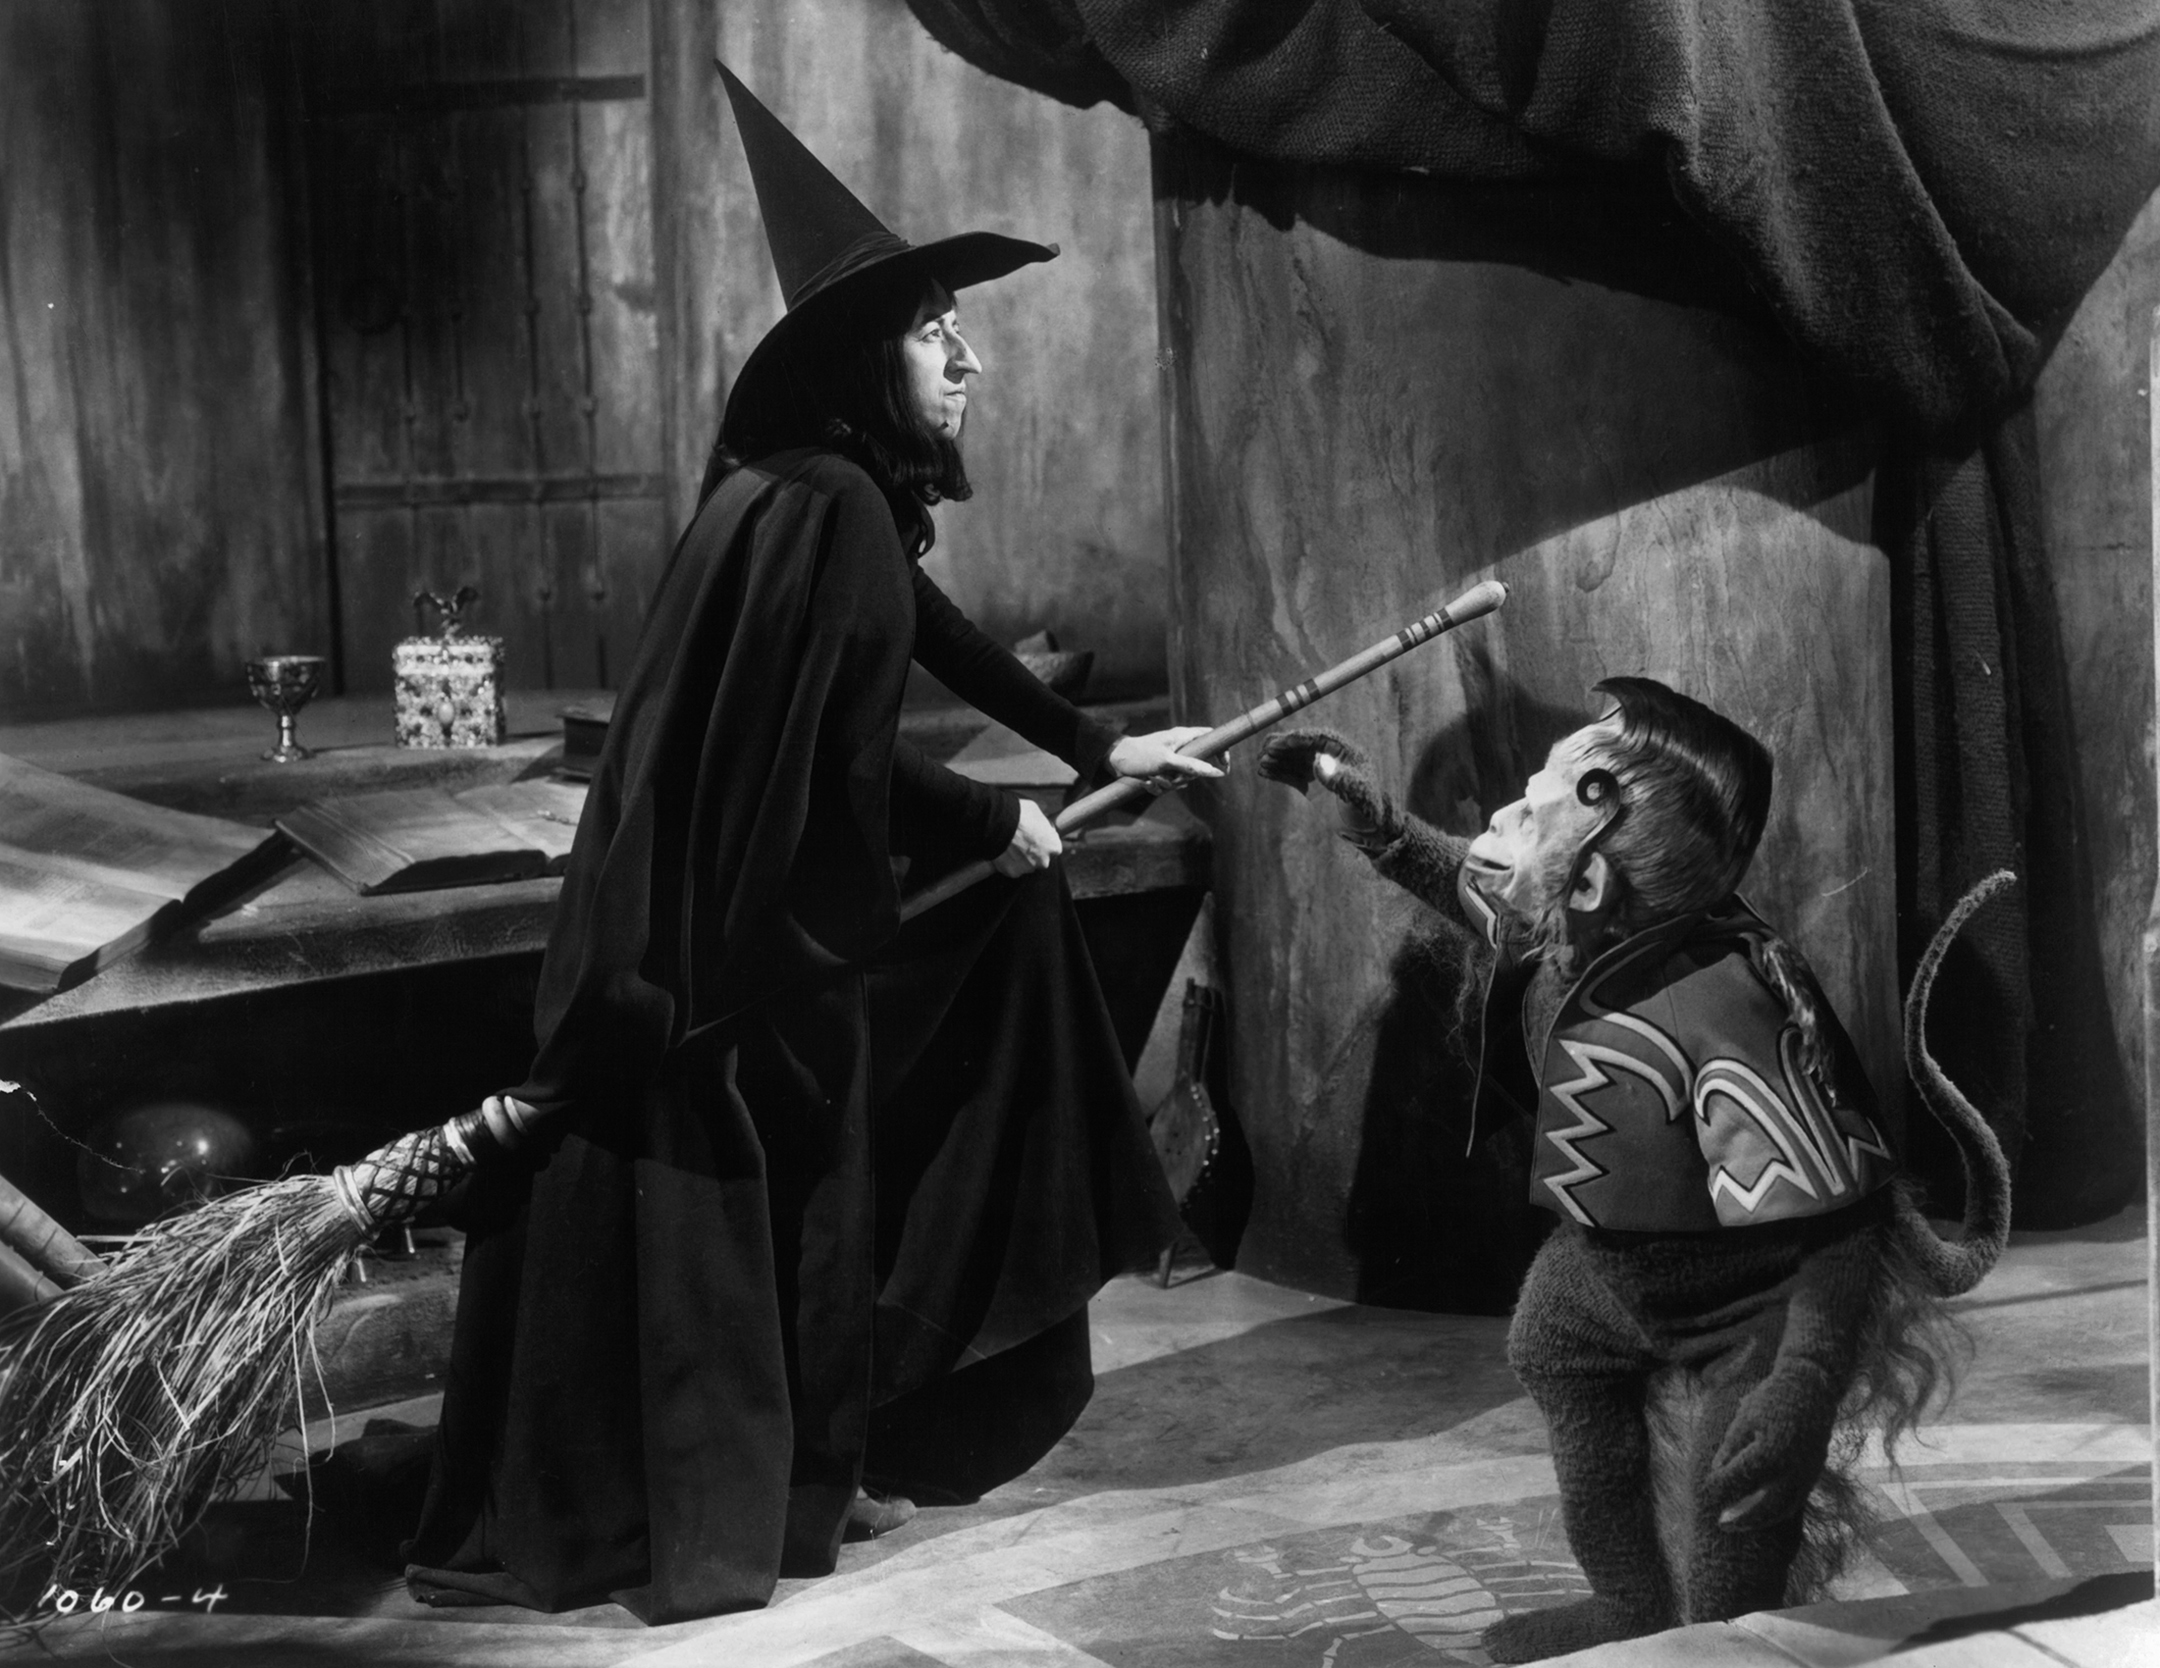 Black and white still from the Wizard of Oz showing the Wicked Witch on her broom with a Flying Monkey character reaching out to her.